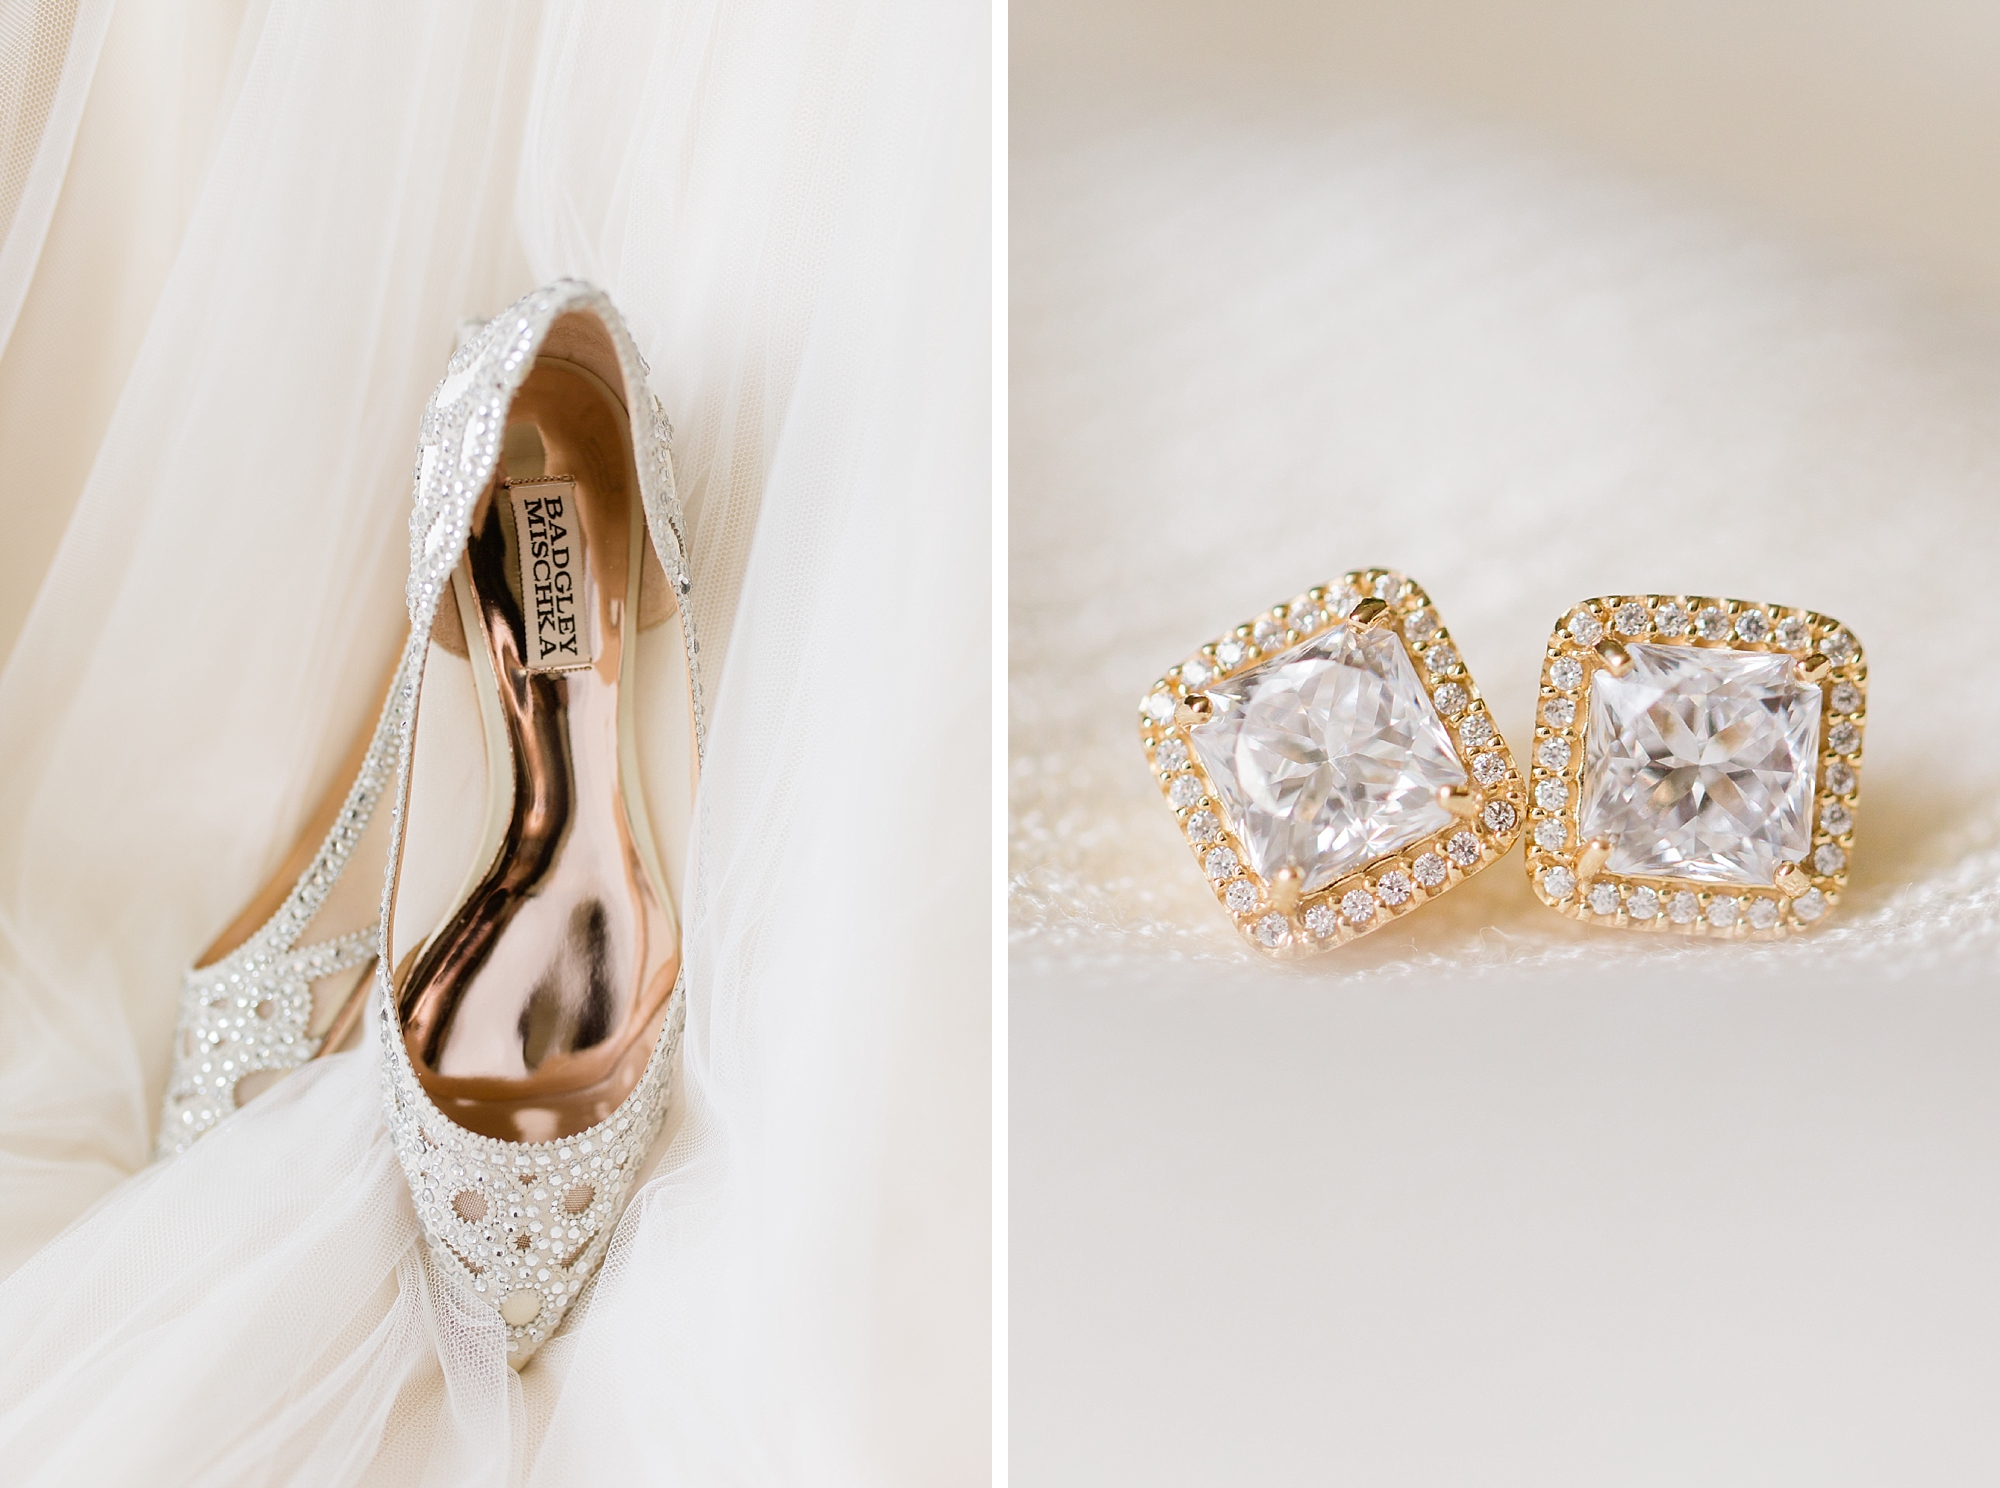 A romantic winter destination wedding at Dollywood Dreammore Resort in Tennessee by Breanne Rochelle Photography.